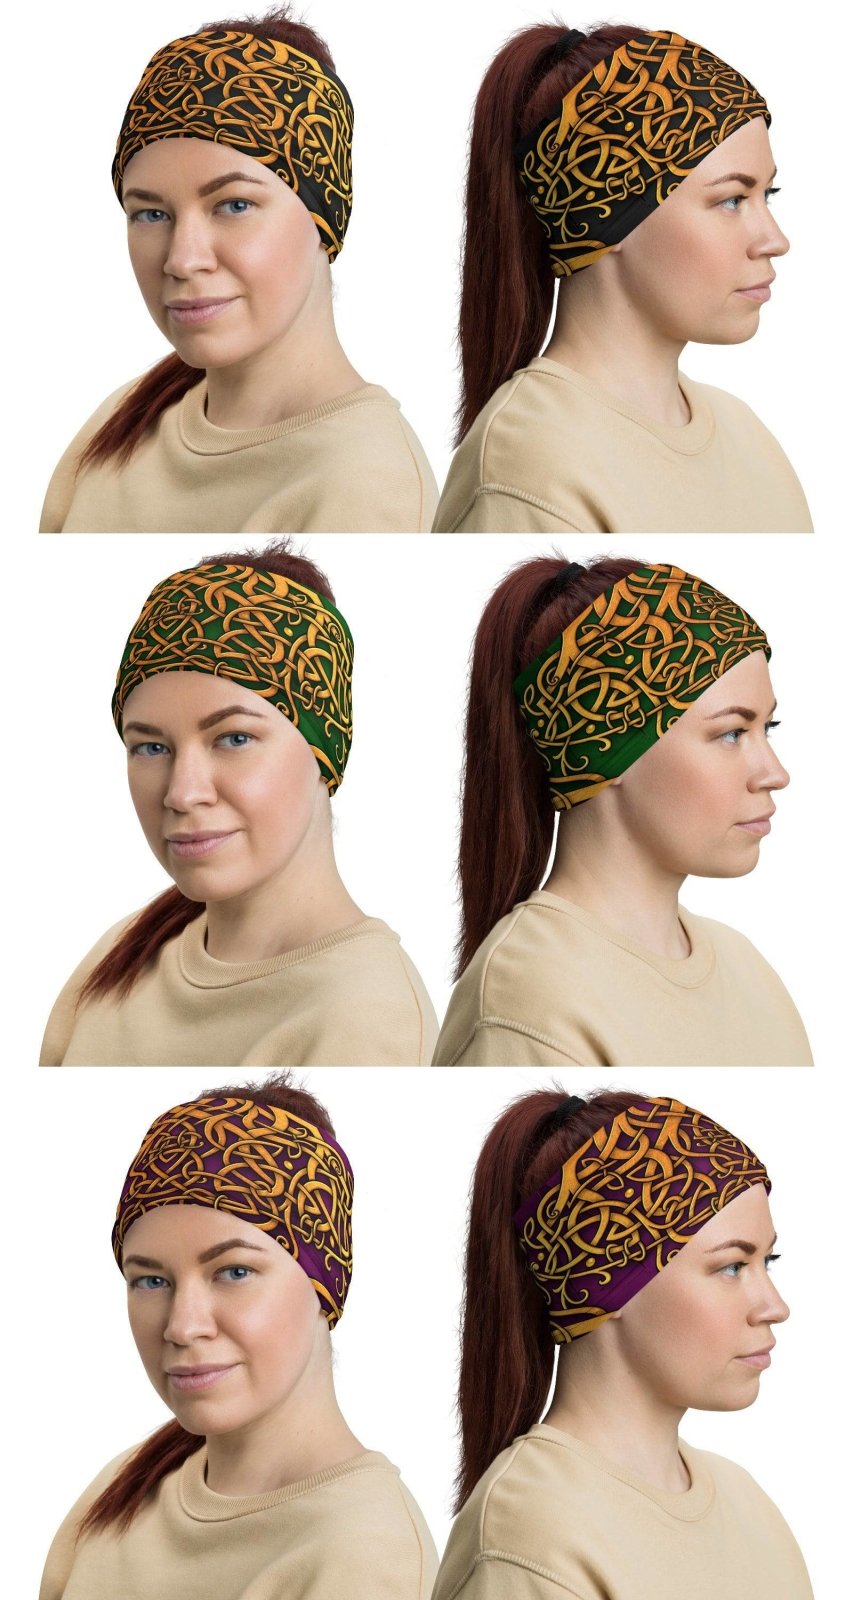 Celtic Neck Gaiter, Face Mask, Head Covering, Pagan Outfit, Tree of Life, Witchy - Gold & 3 Color Options - Abysm Internal